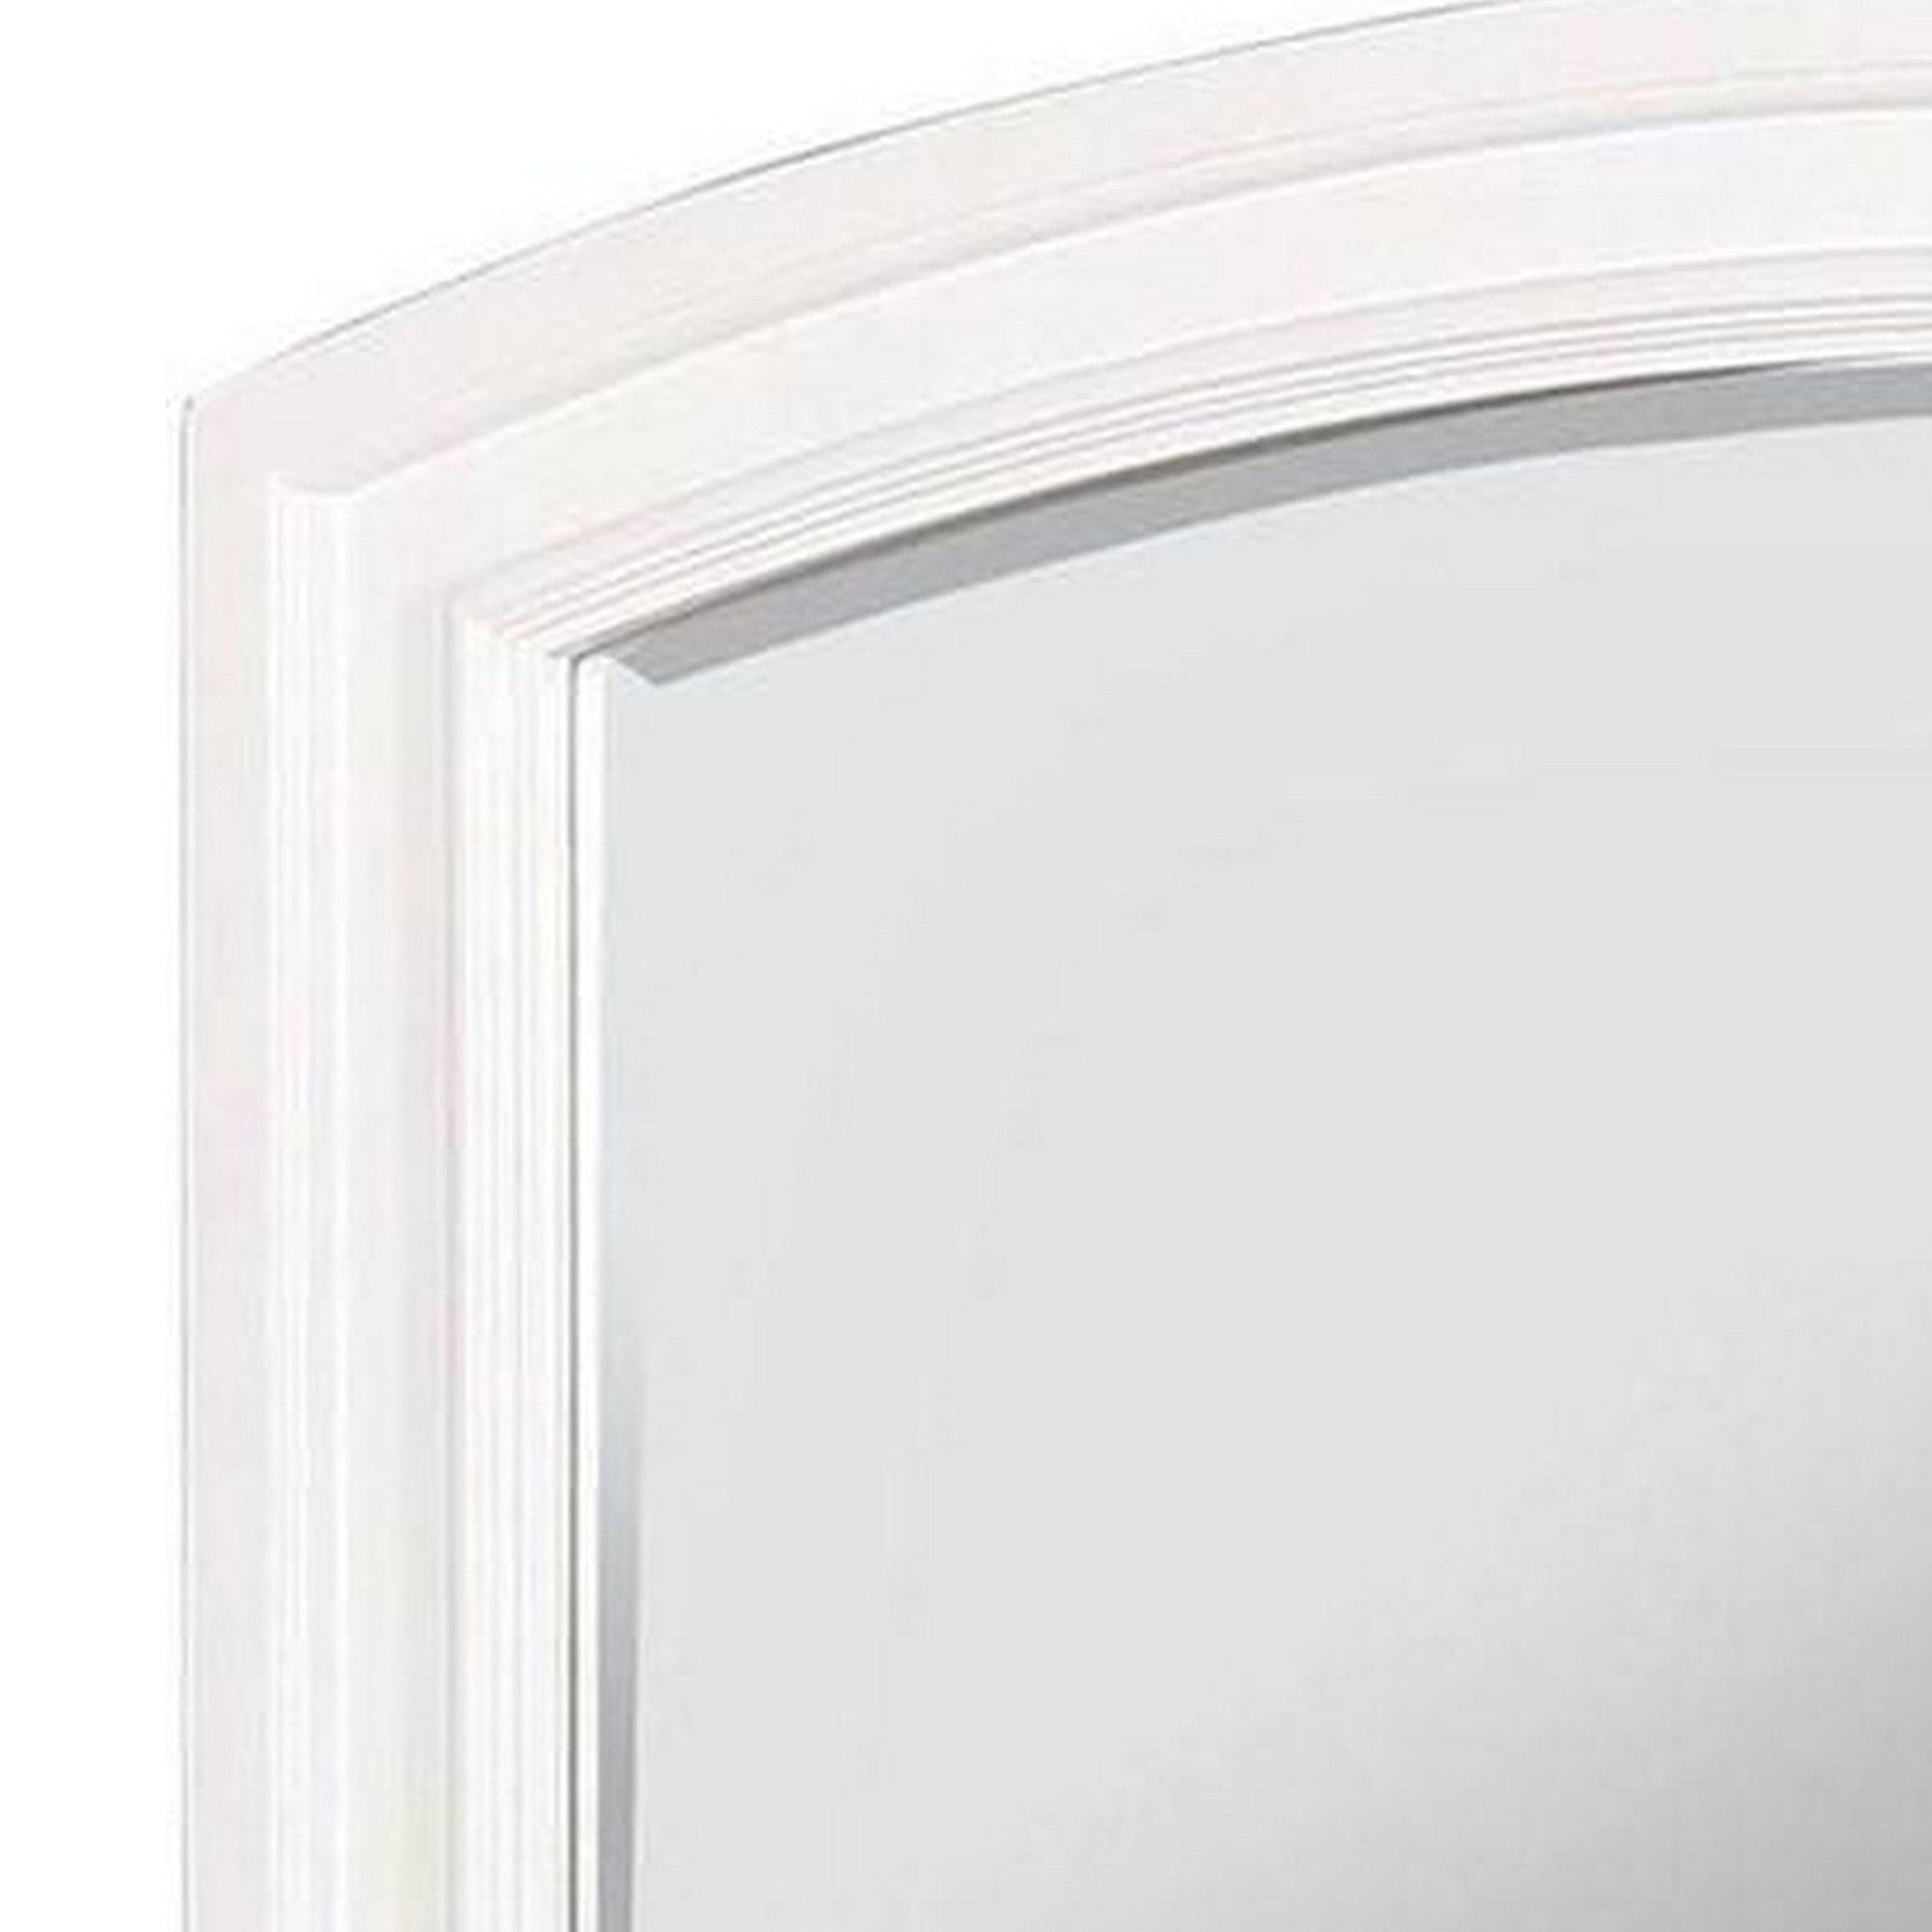 Benzara 36" White Wooden Frame Mirror With Arched Top